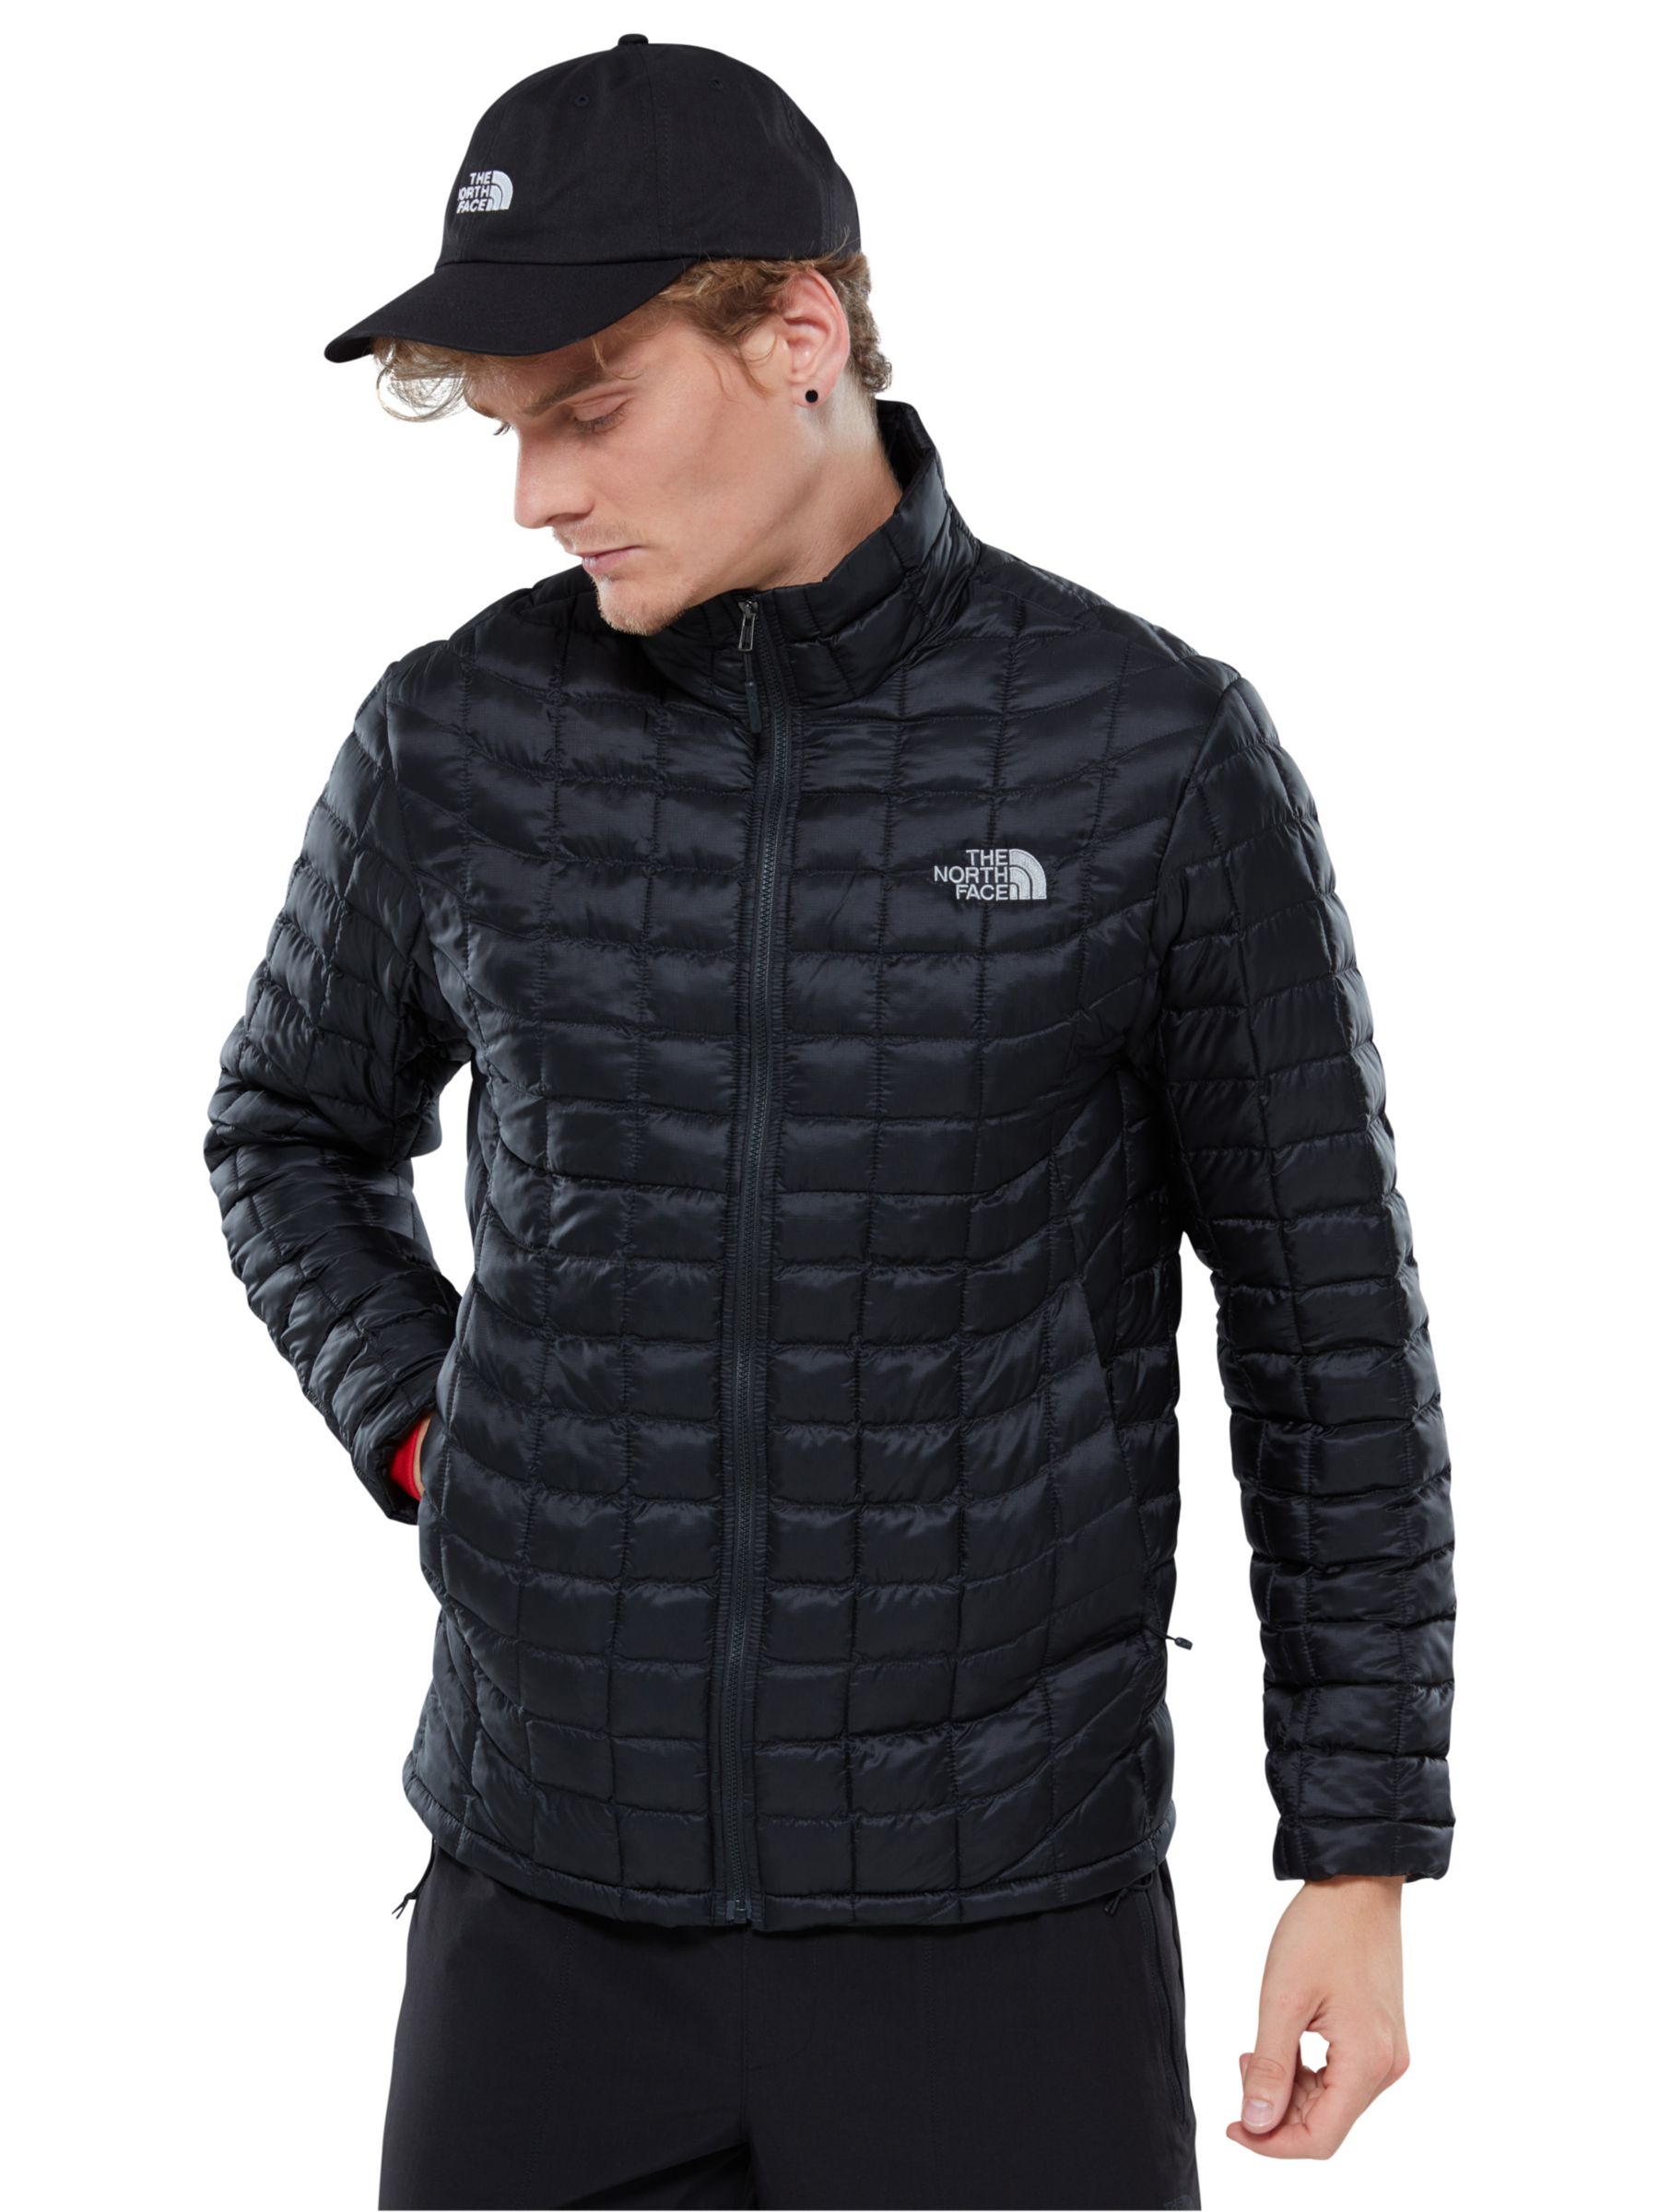 men's thermoball jacket sale